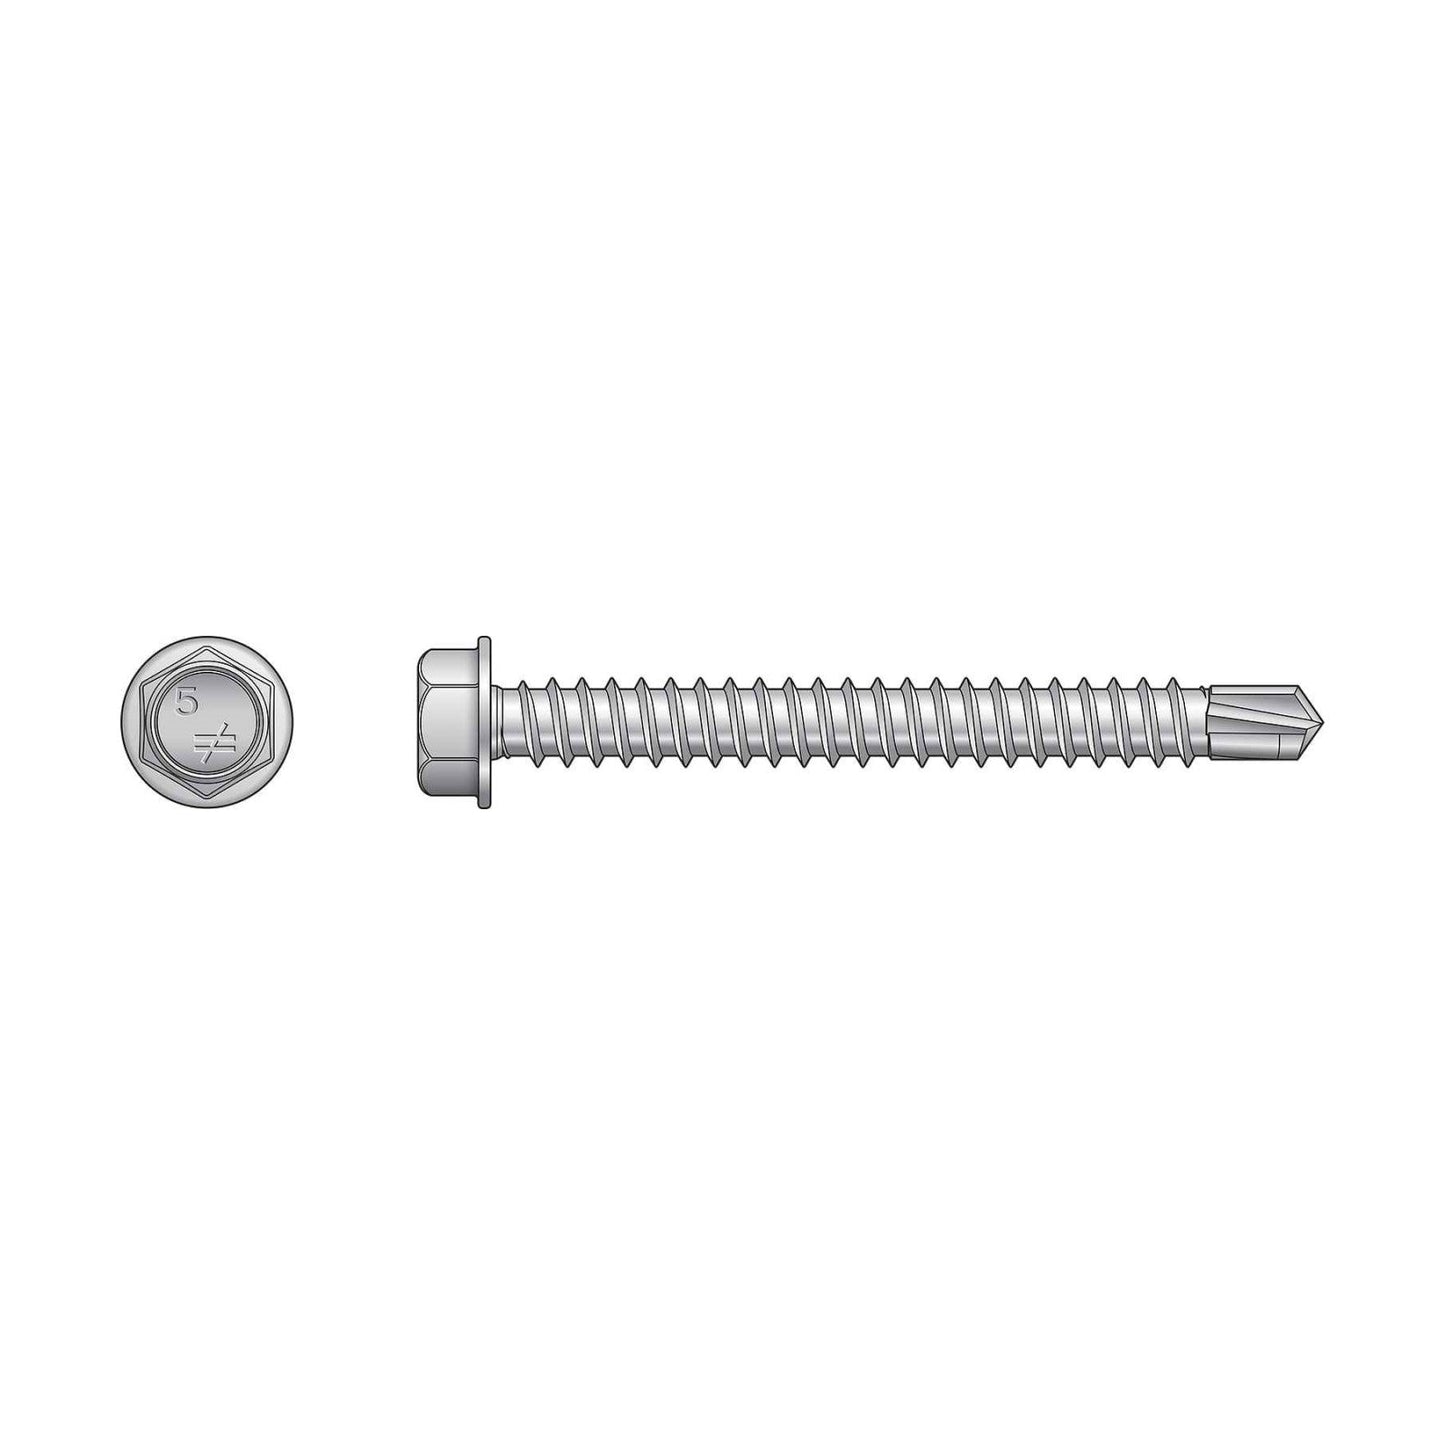 Simpson T08100HDUC #8 x 1" Self-Drilling Hex-Washer Head Screw - 316 Stainless Steel, Pkg 100